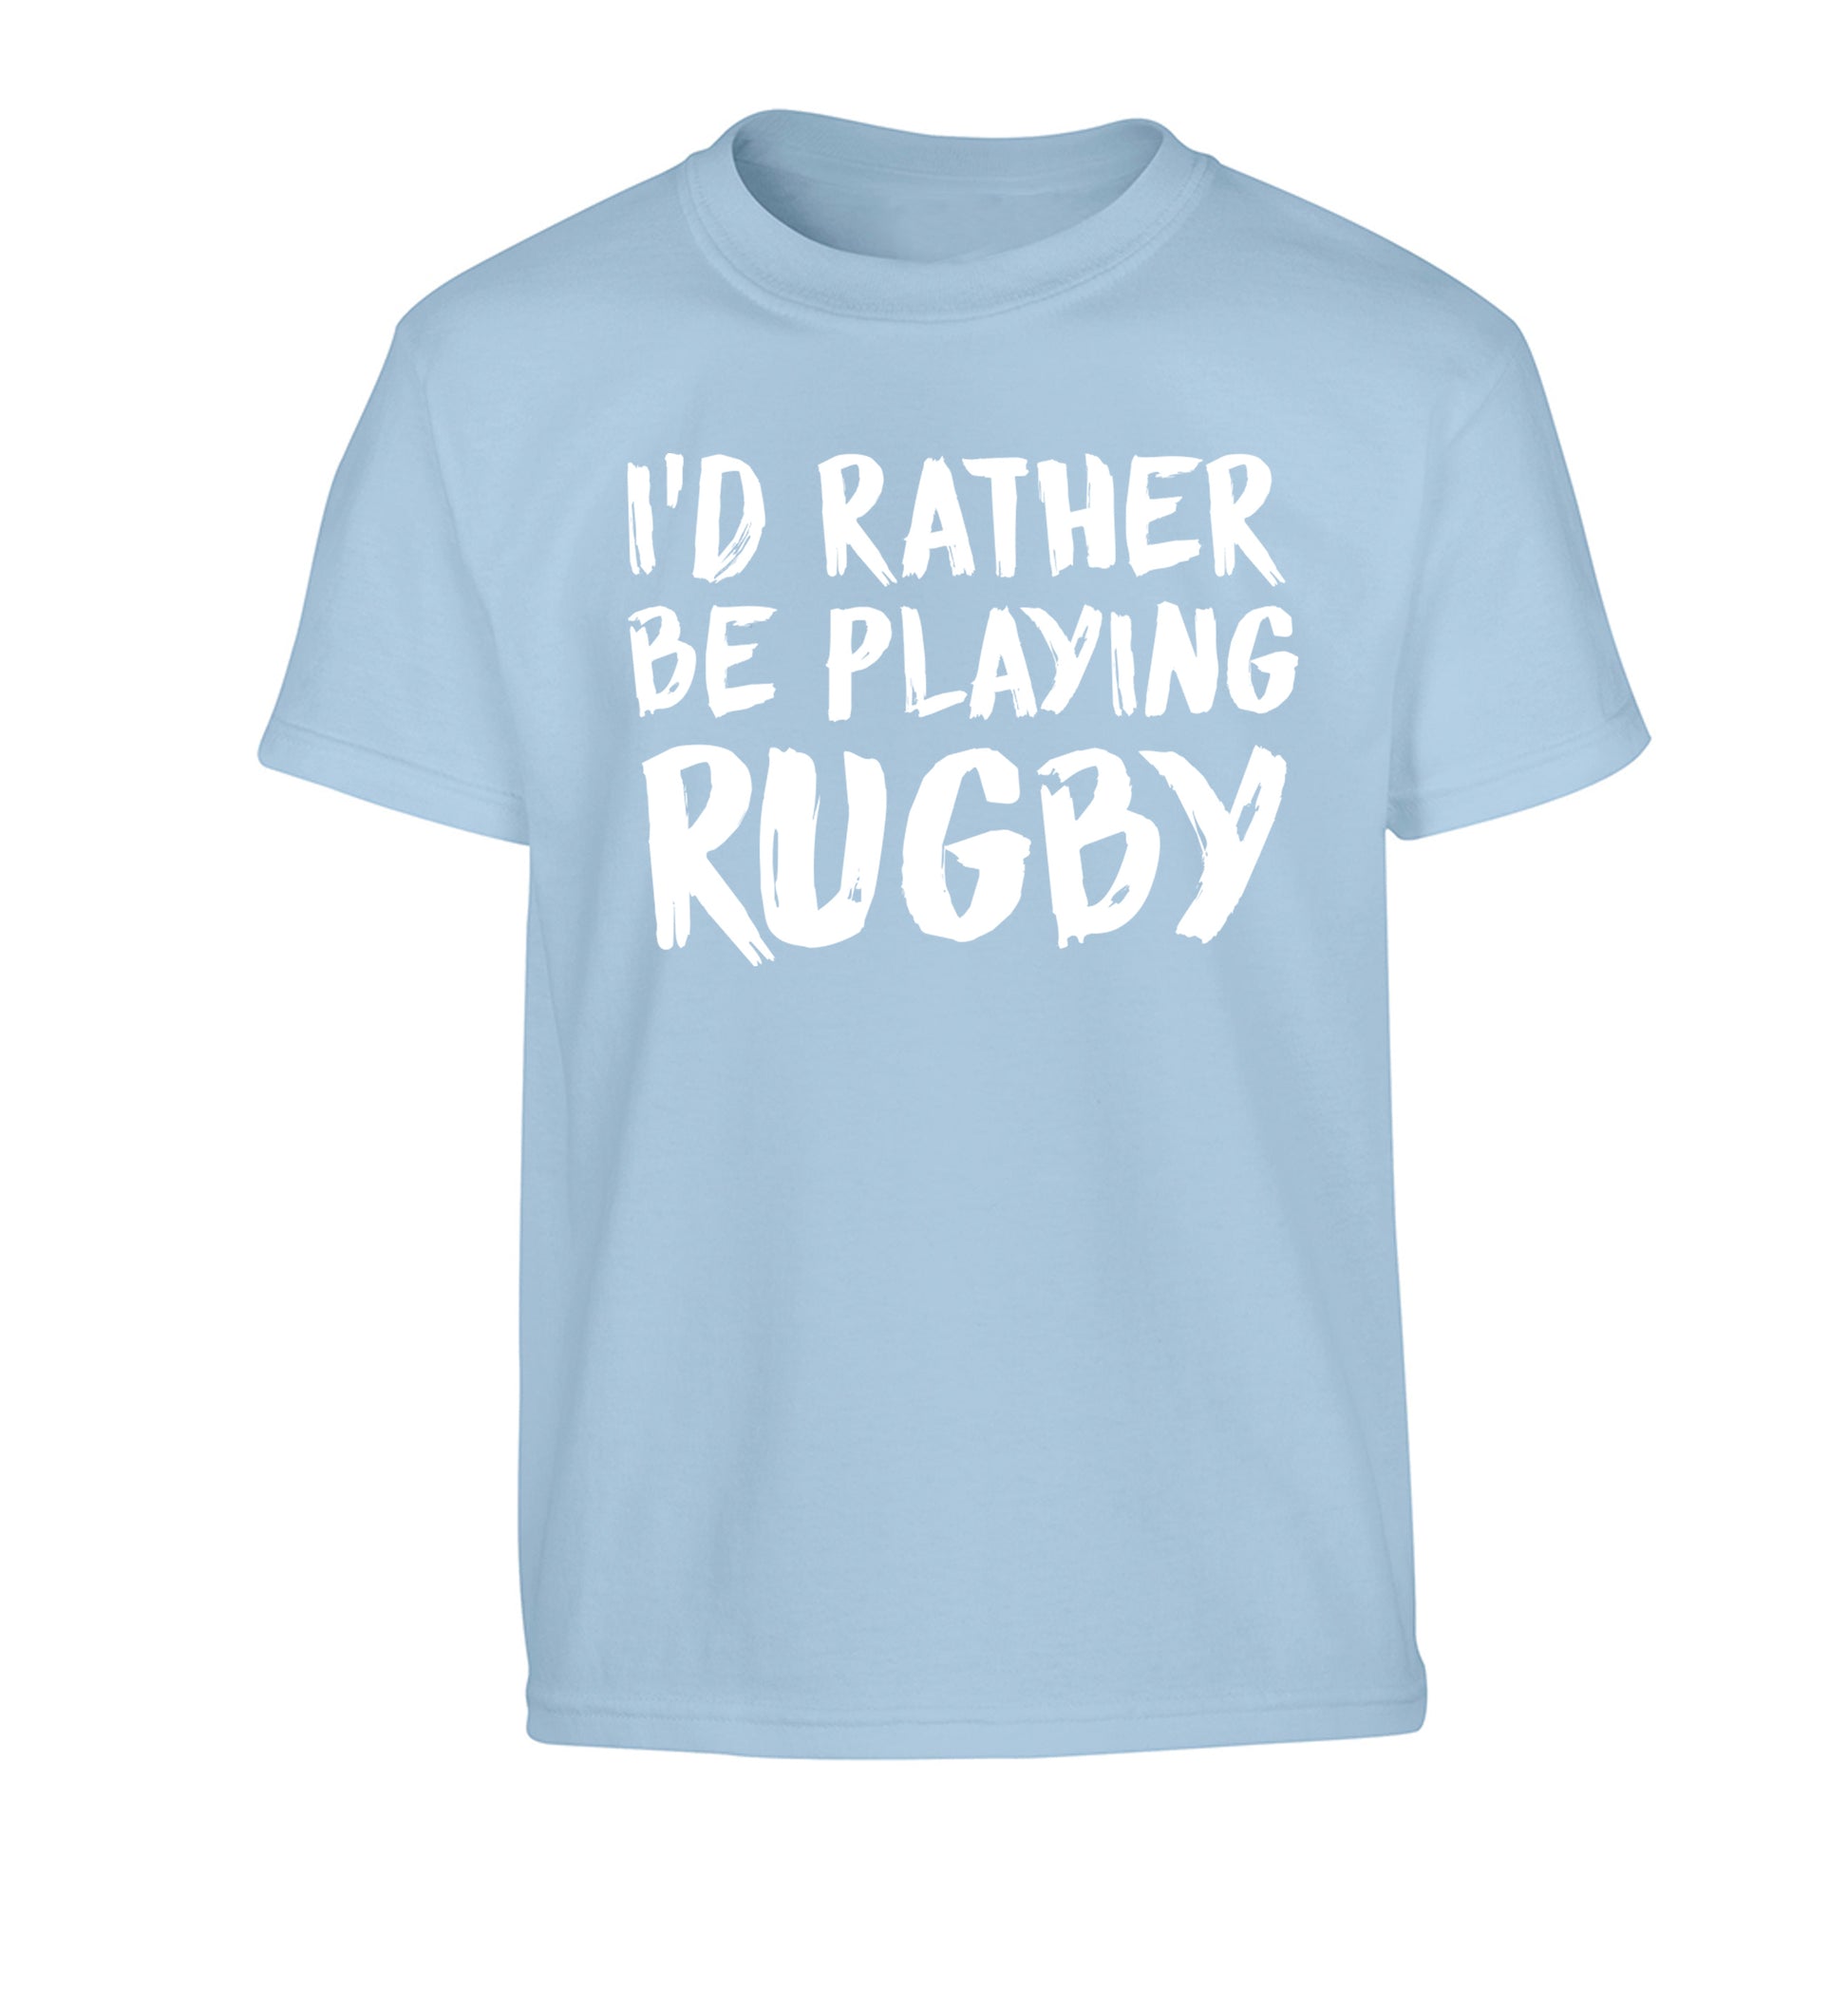 I'd rather be playing rugby Children's light blue Tshirt 12-13 Years